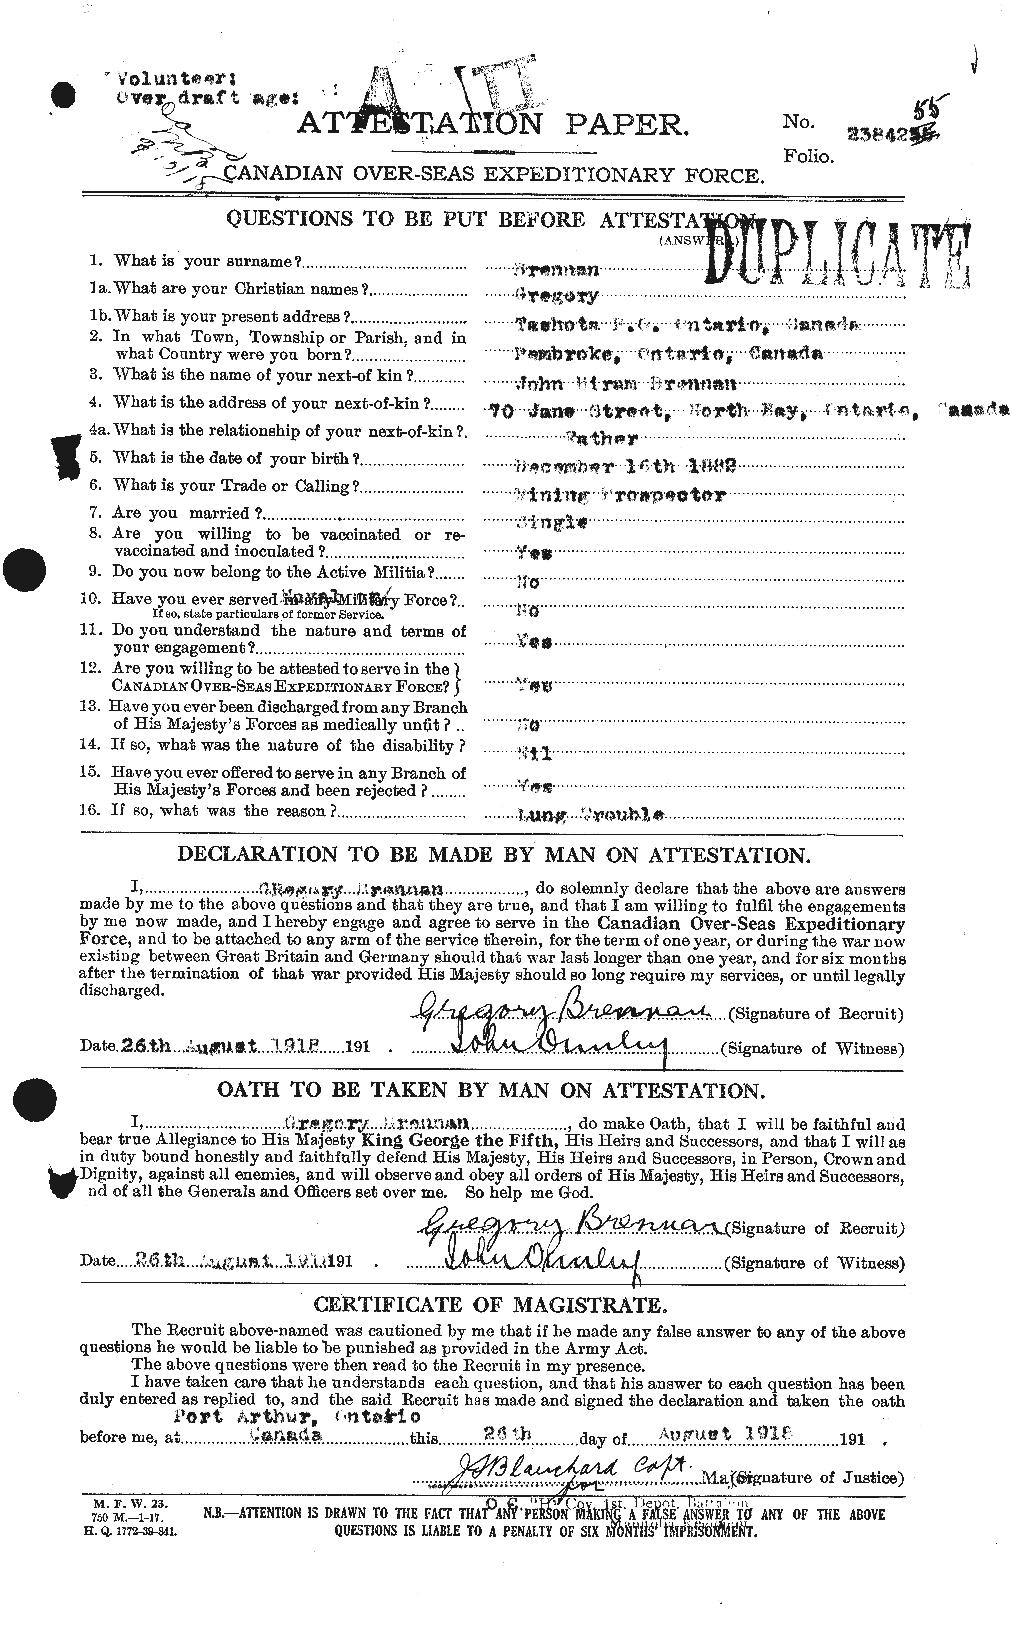 Personnel Records of the First World War - CEF 259310a